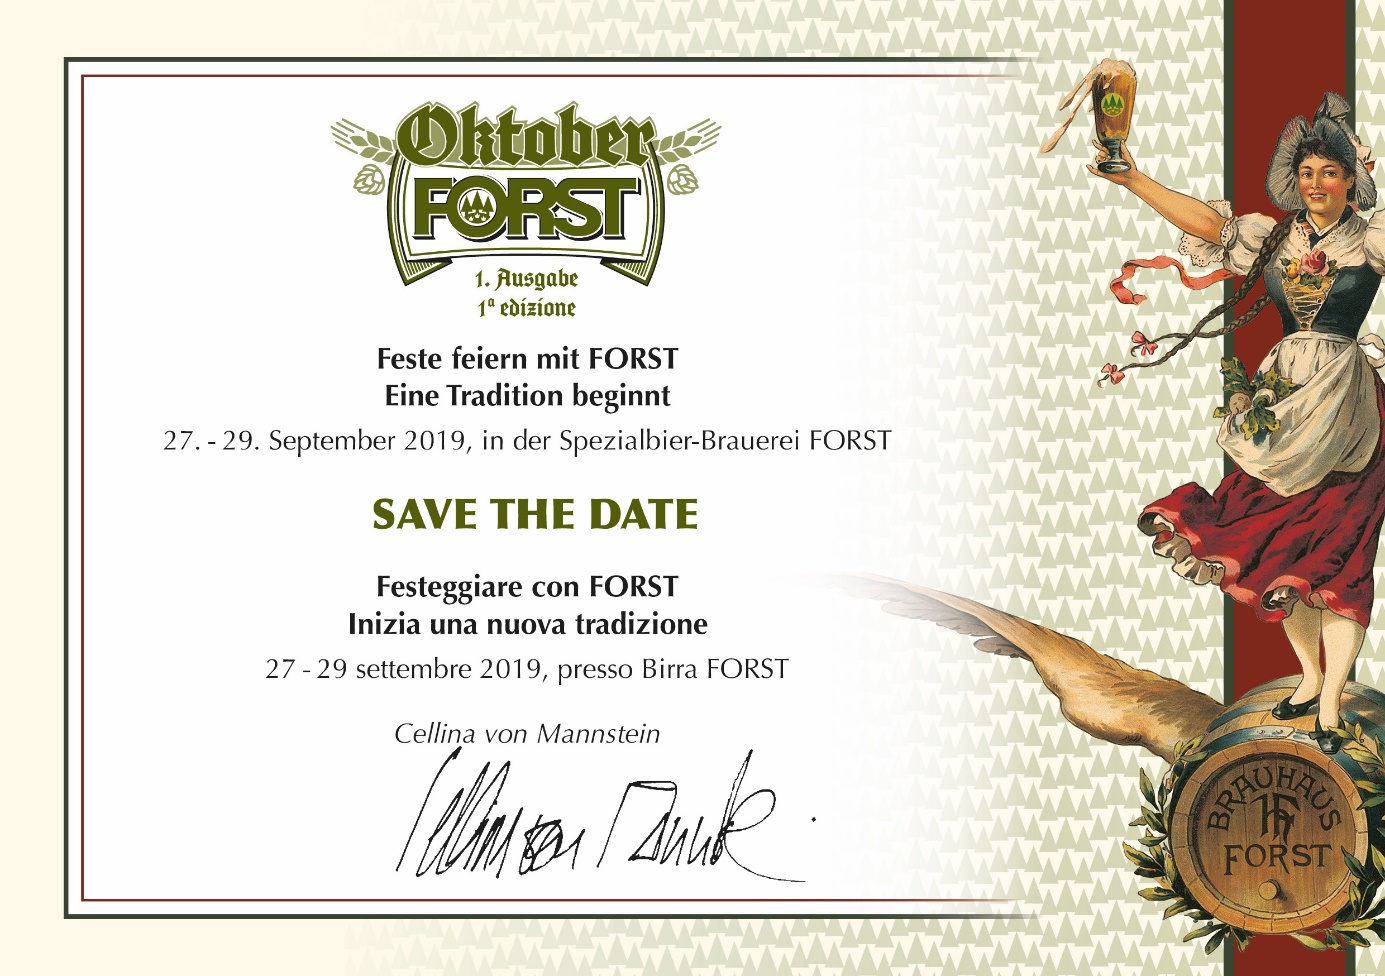 SAVE THE DATE OktoberFORST, 27 – 29 settembre